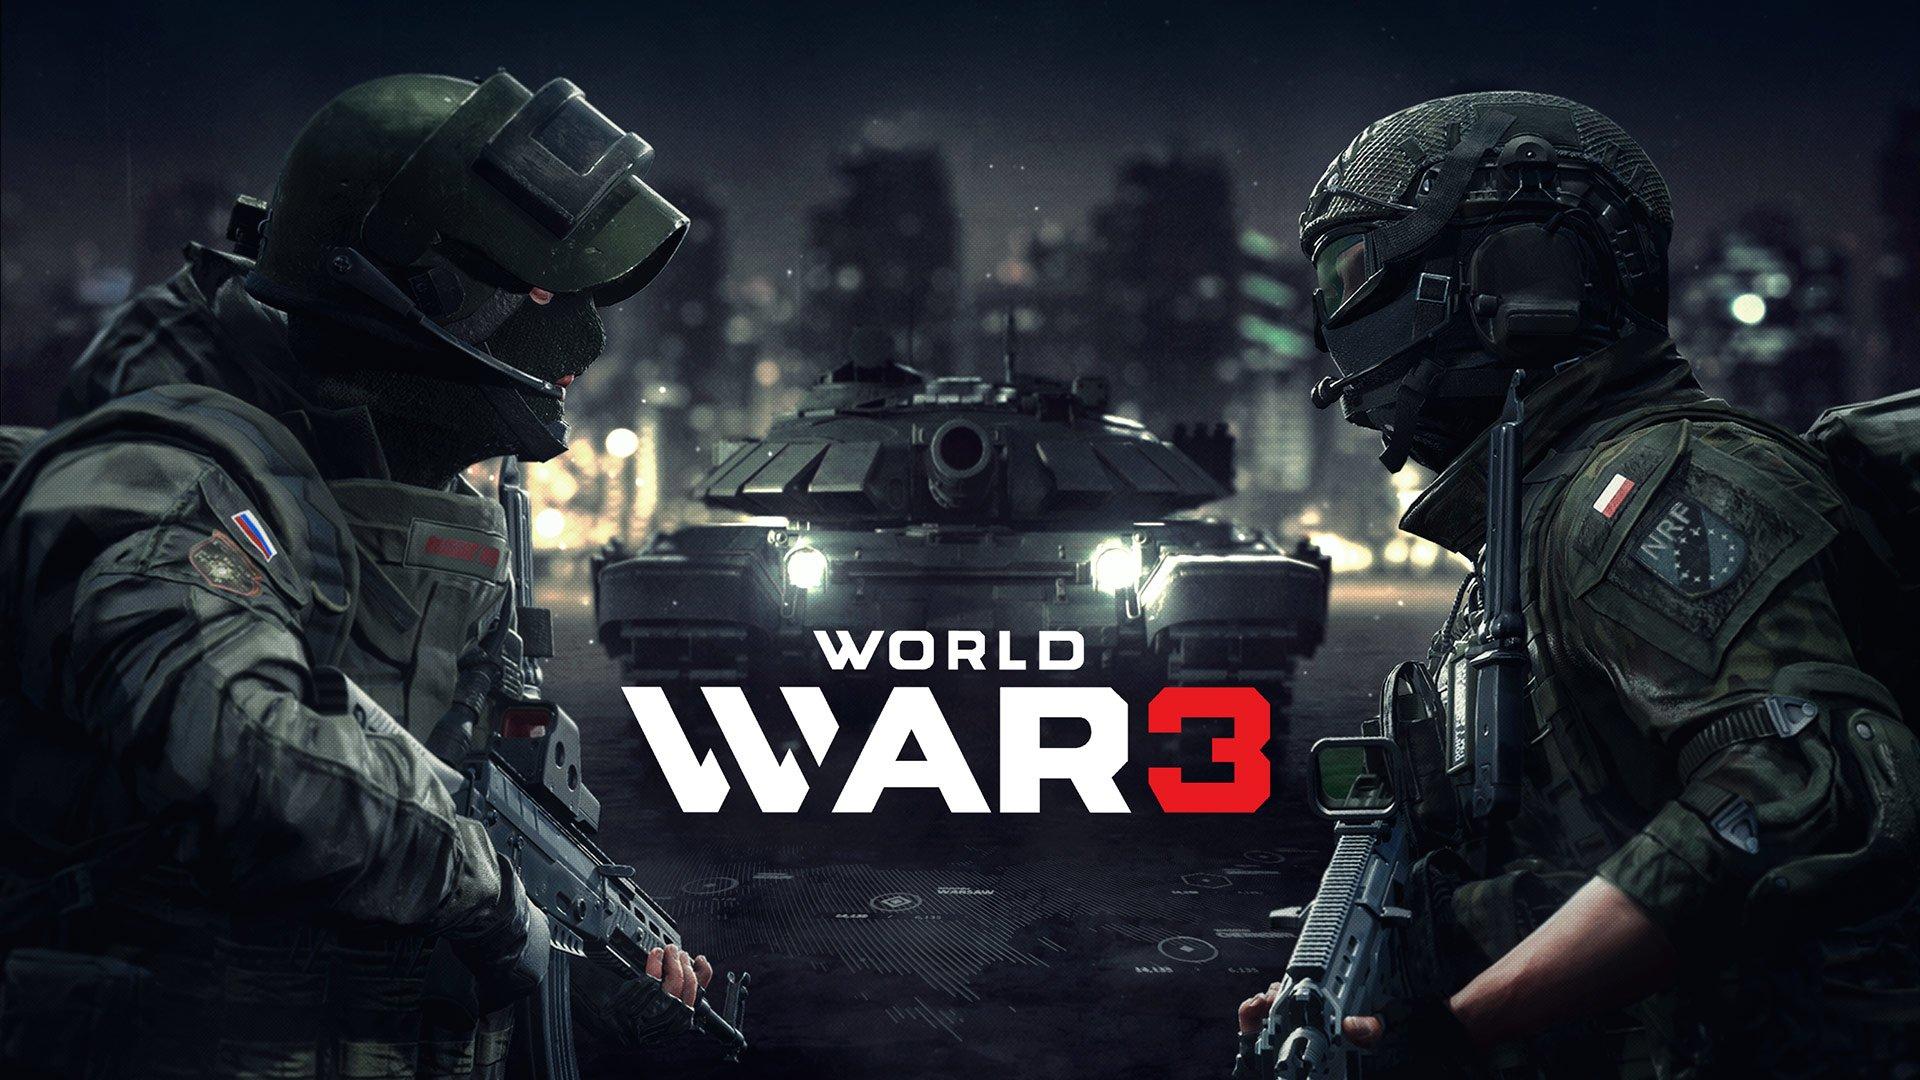 World War 3 HD Wallpaper and Background Image